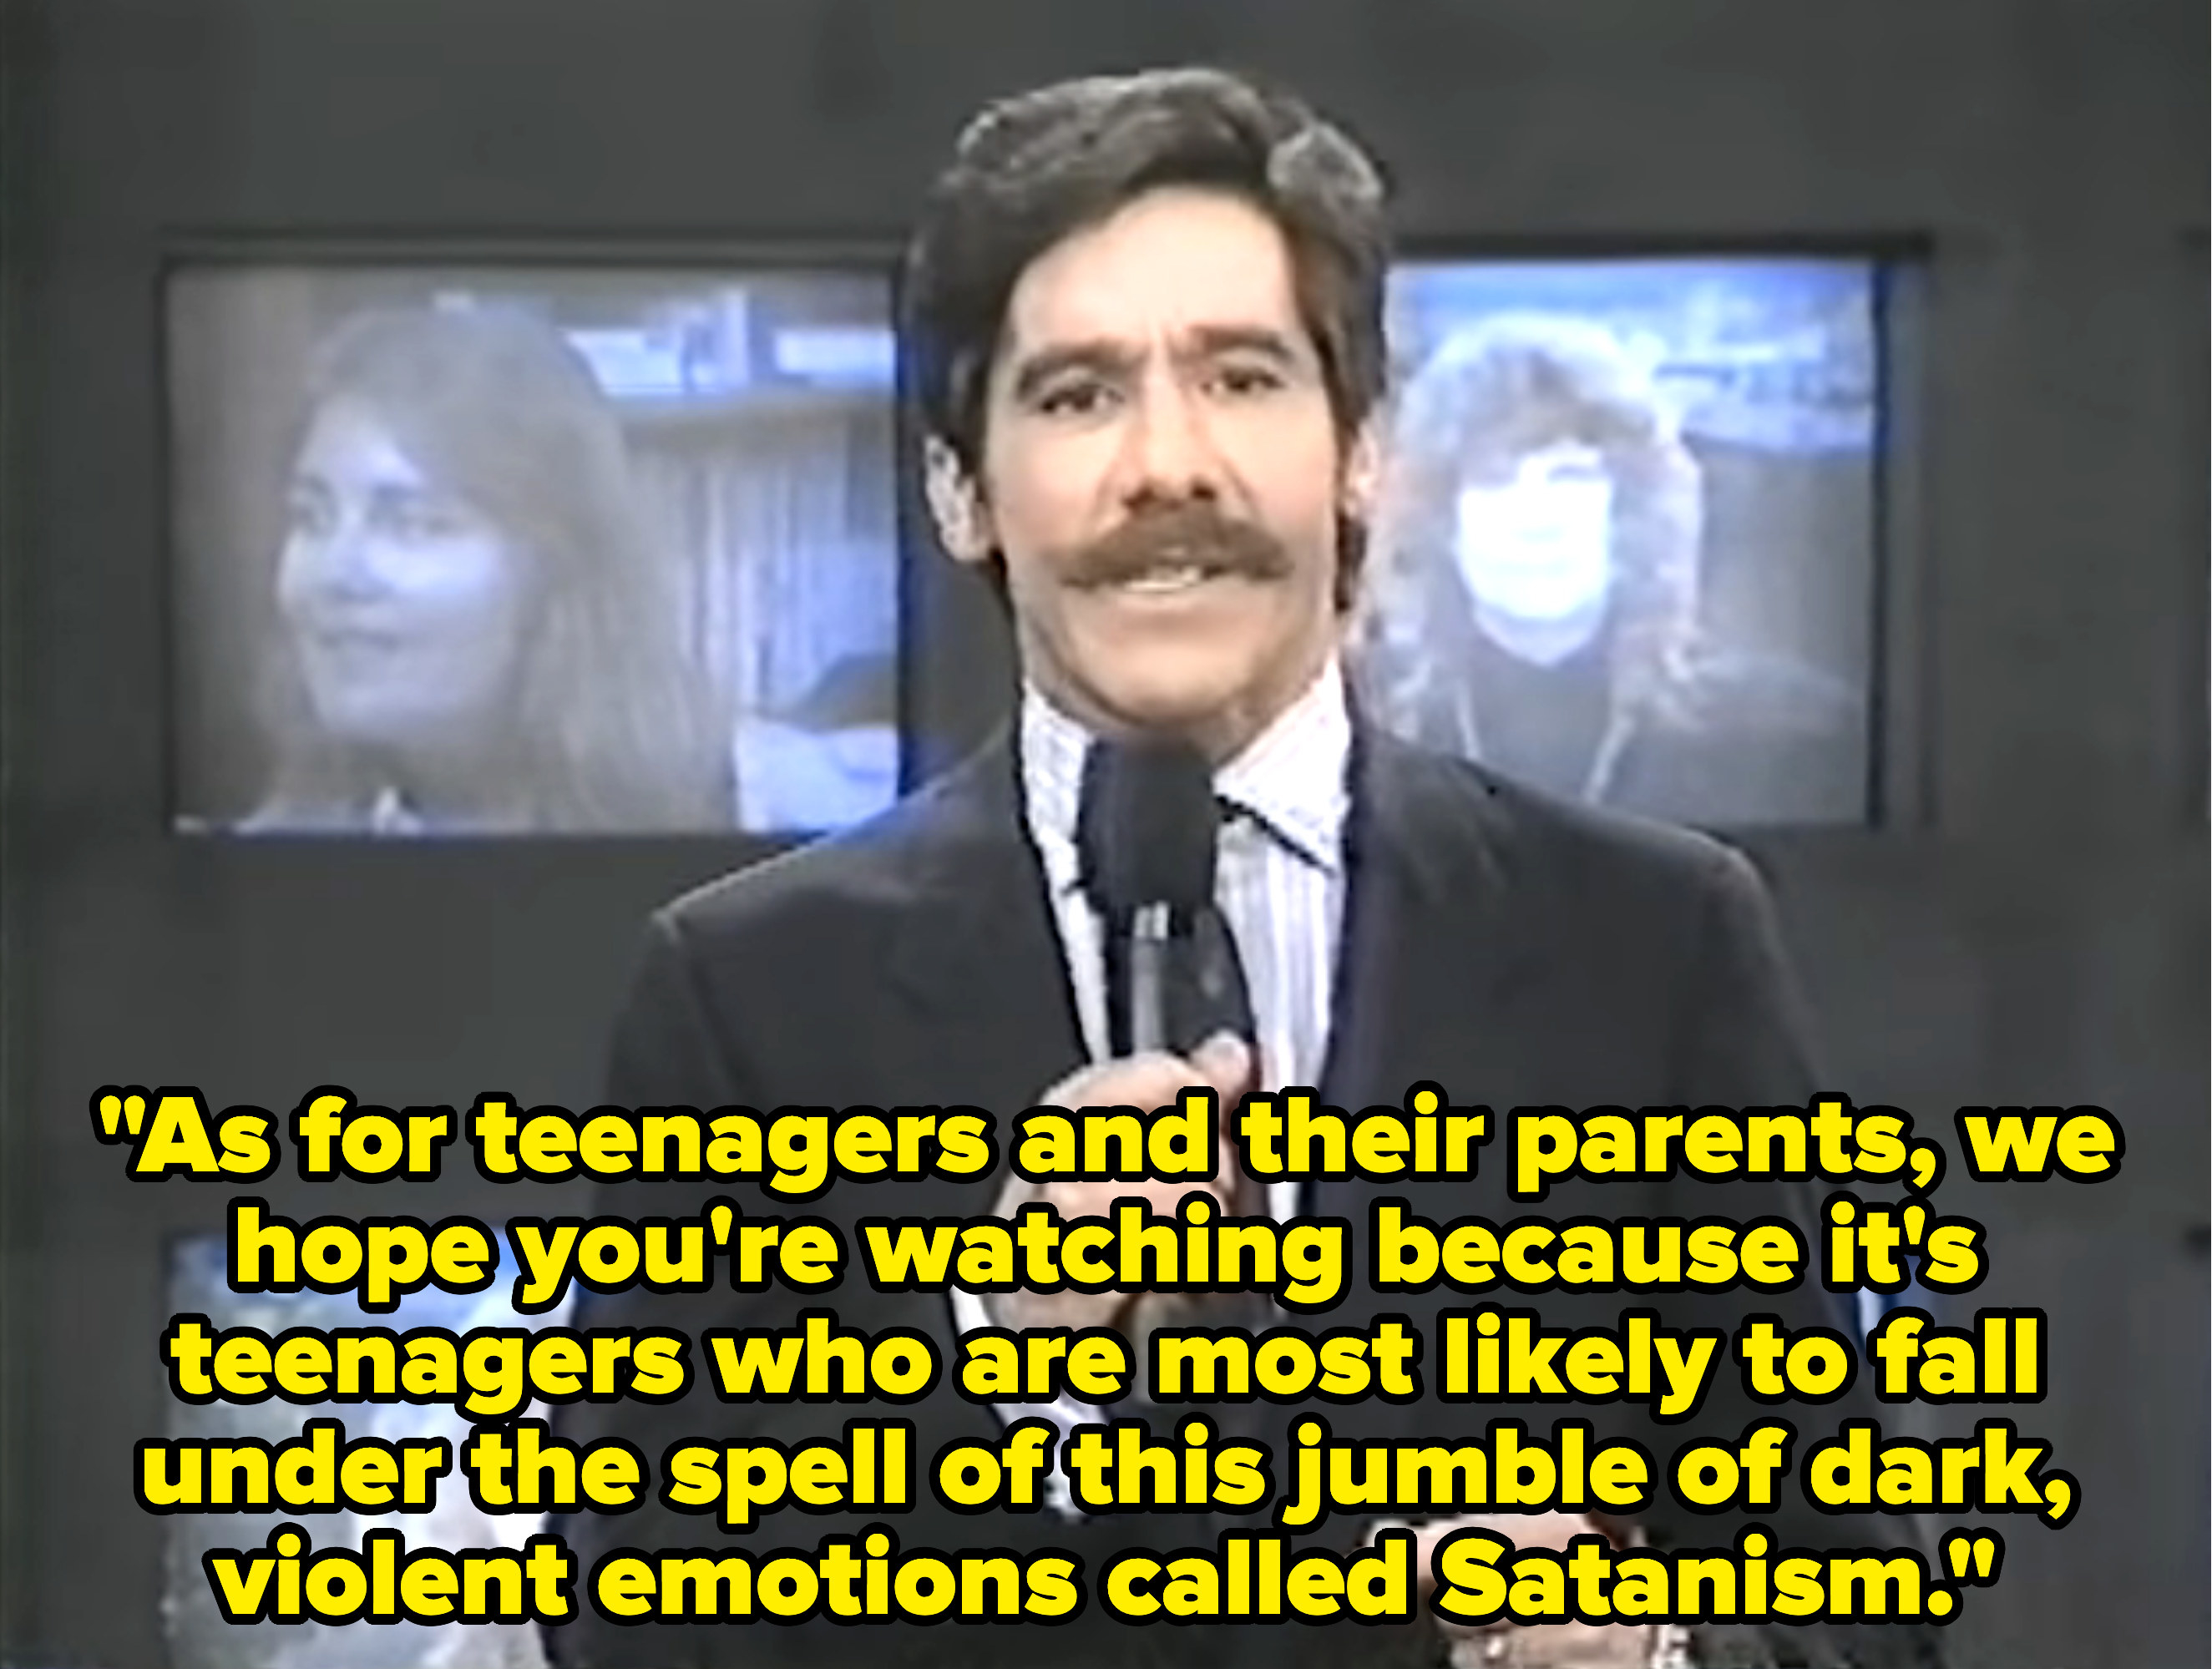 &quot;As for teenagers and parents, we hope you&#x27;re watching because it&#x27;s teenagers who are most likely to fall under the spell...&quot;